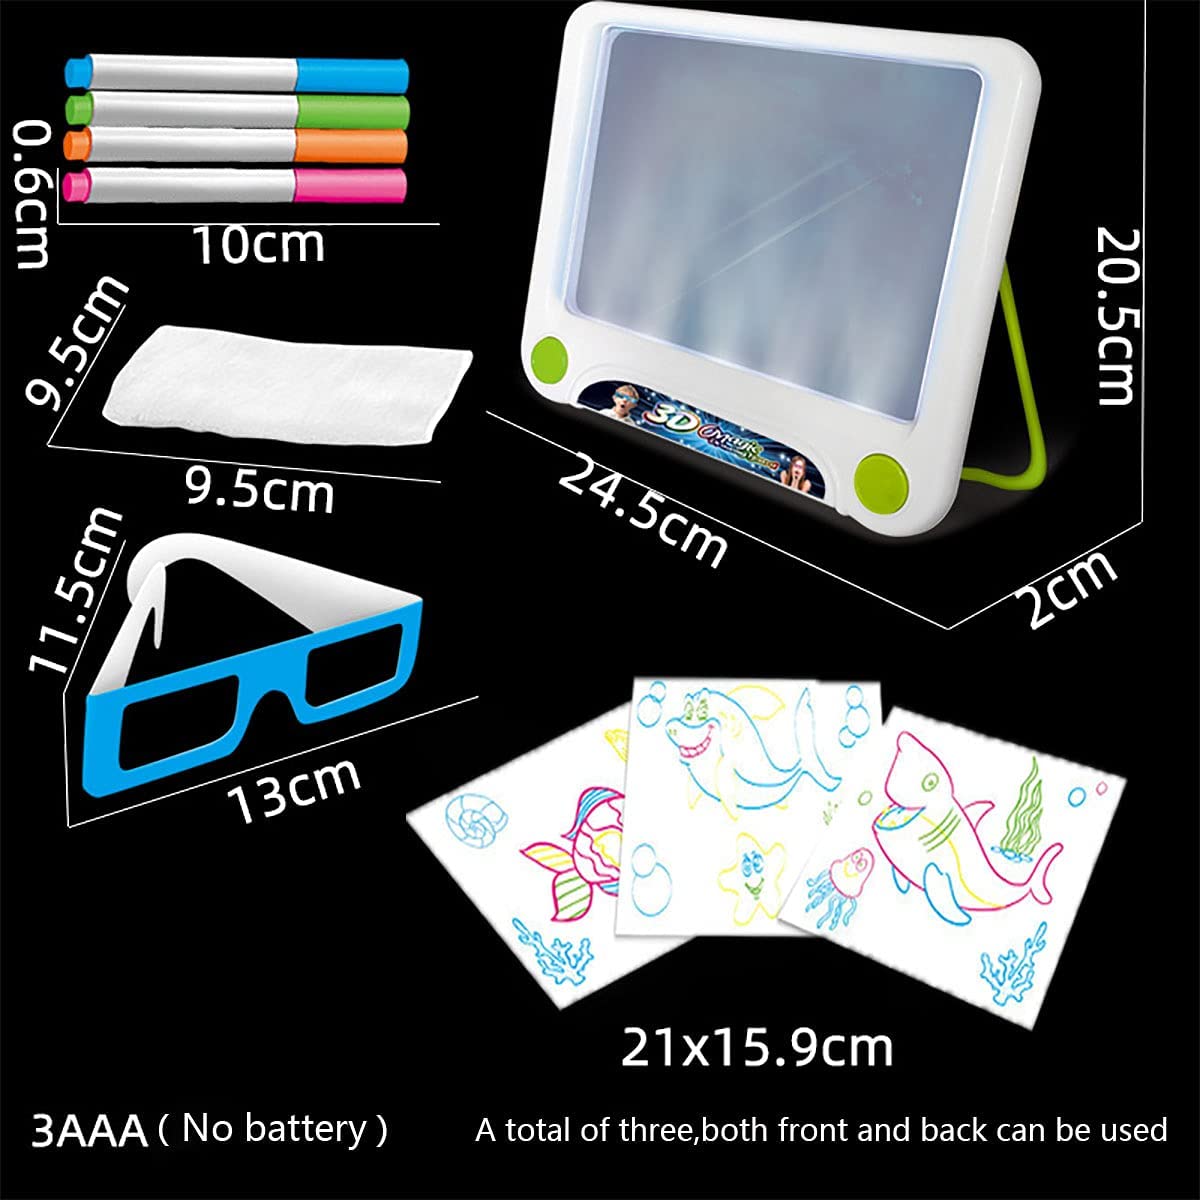 Electronic-Learning-LED-Glow-Drawing-Board-Kids-Doodle-Board-Set-Interactive-Handwriting-Writing-Drawing-Pad-with-4-Fluorescent-Markers-3D-Glasses-for-Girls-Boys-54